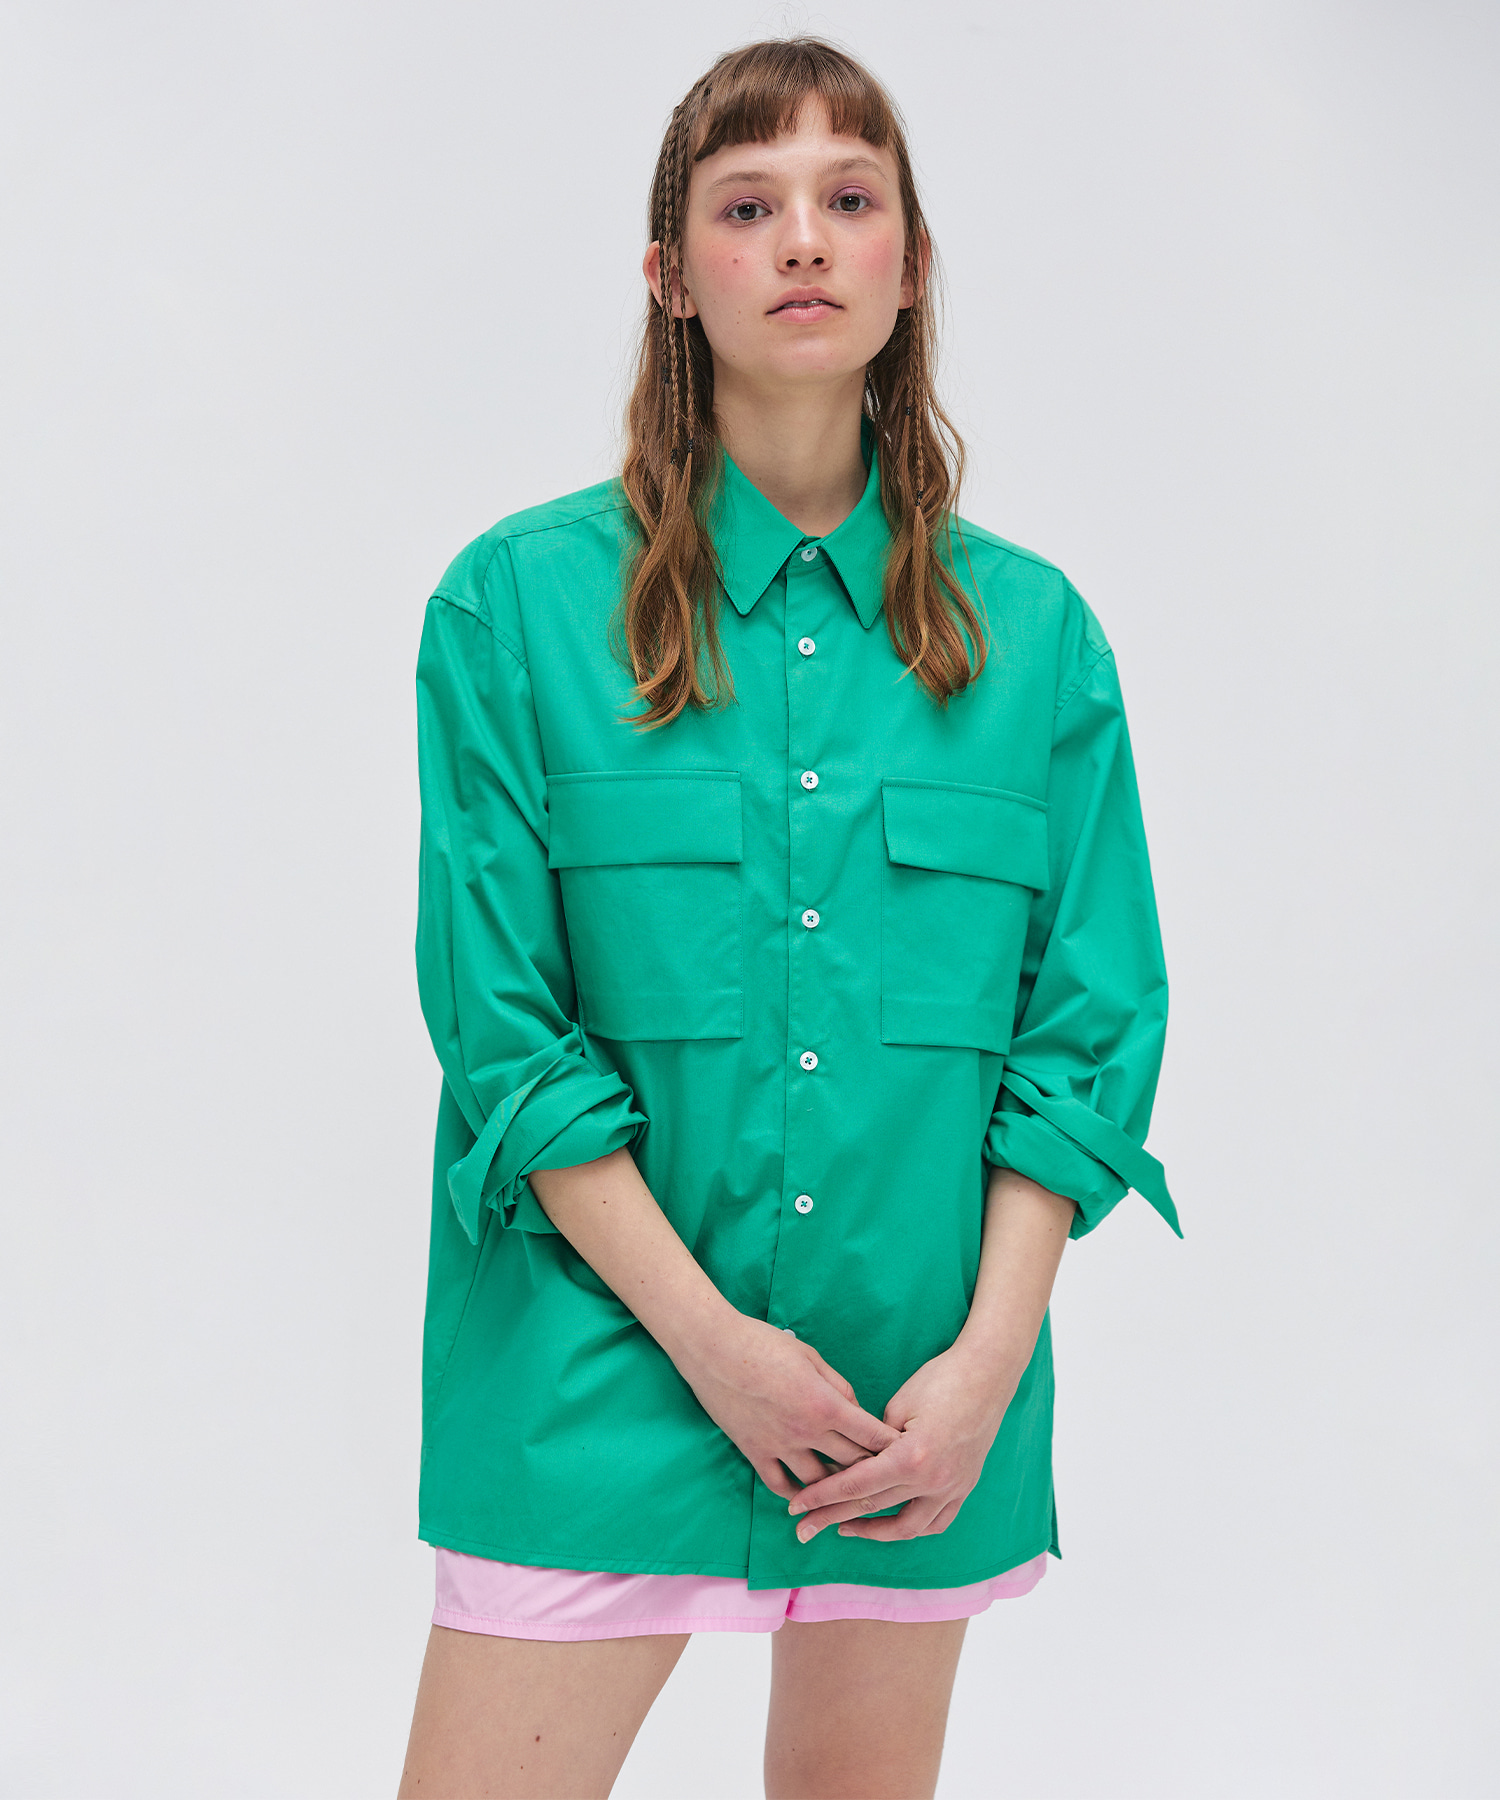 Double Out Pocket Shirt - Green